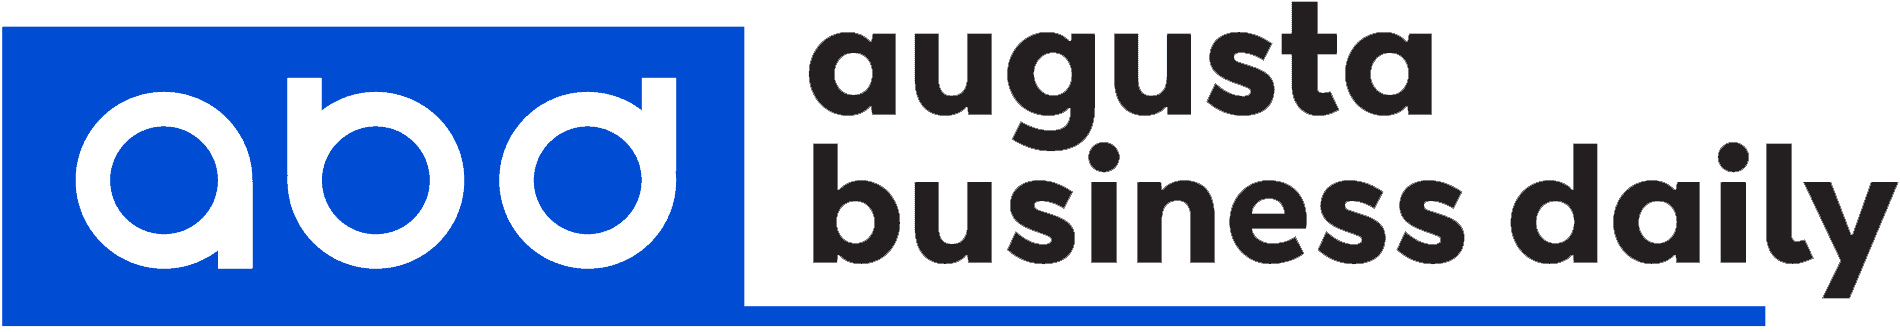 Augusta Business Daily